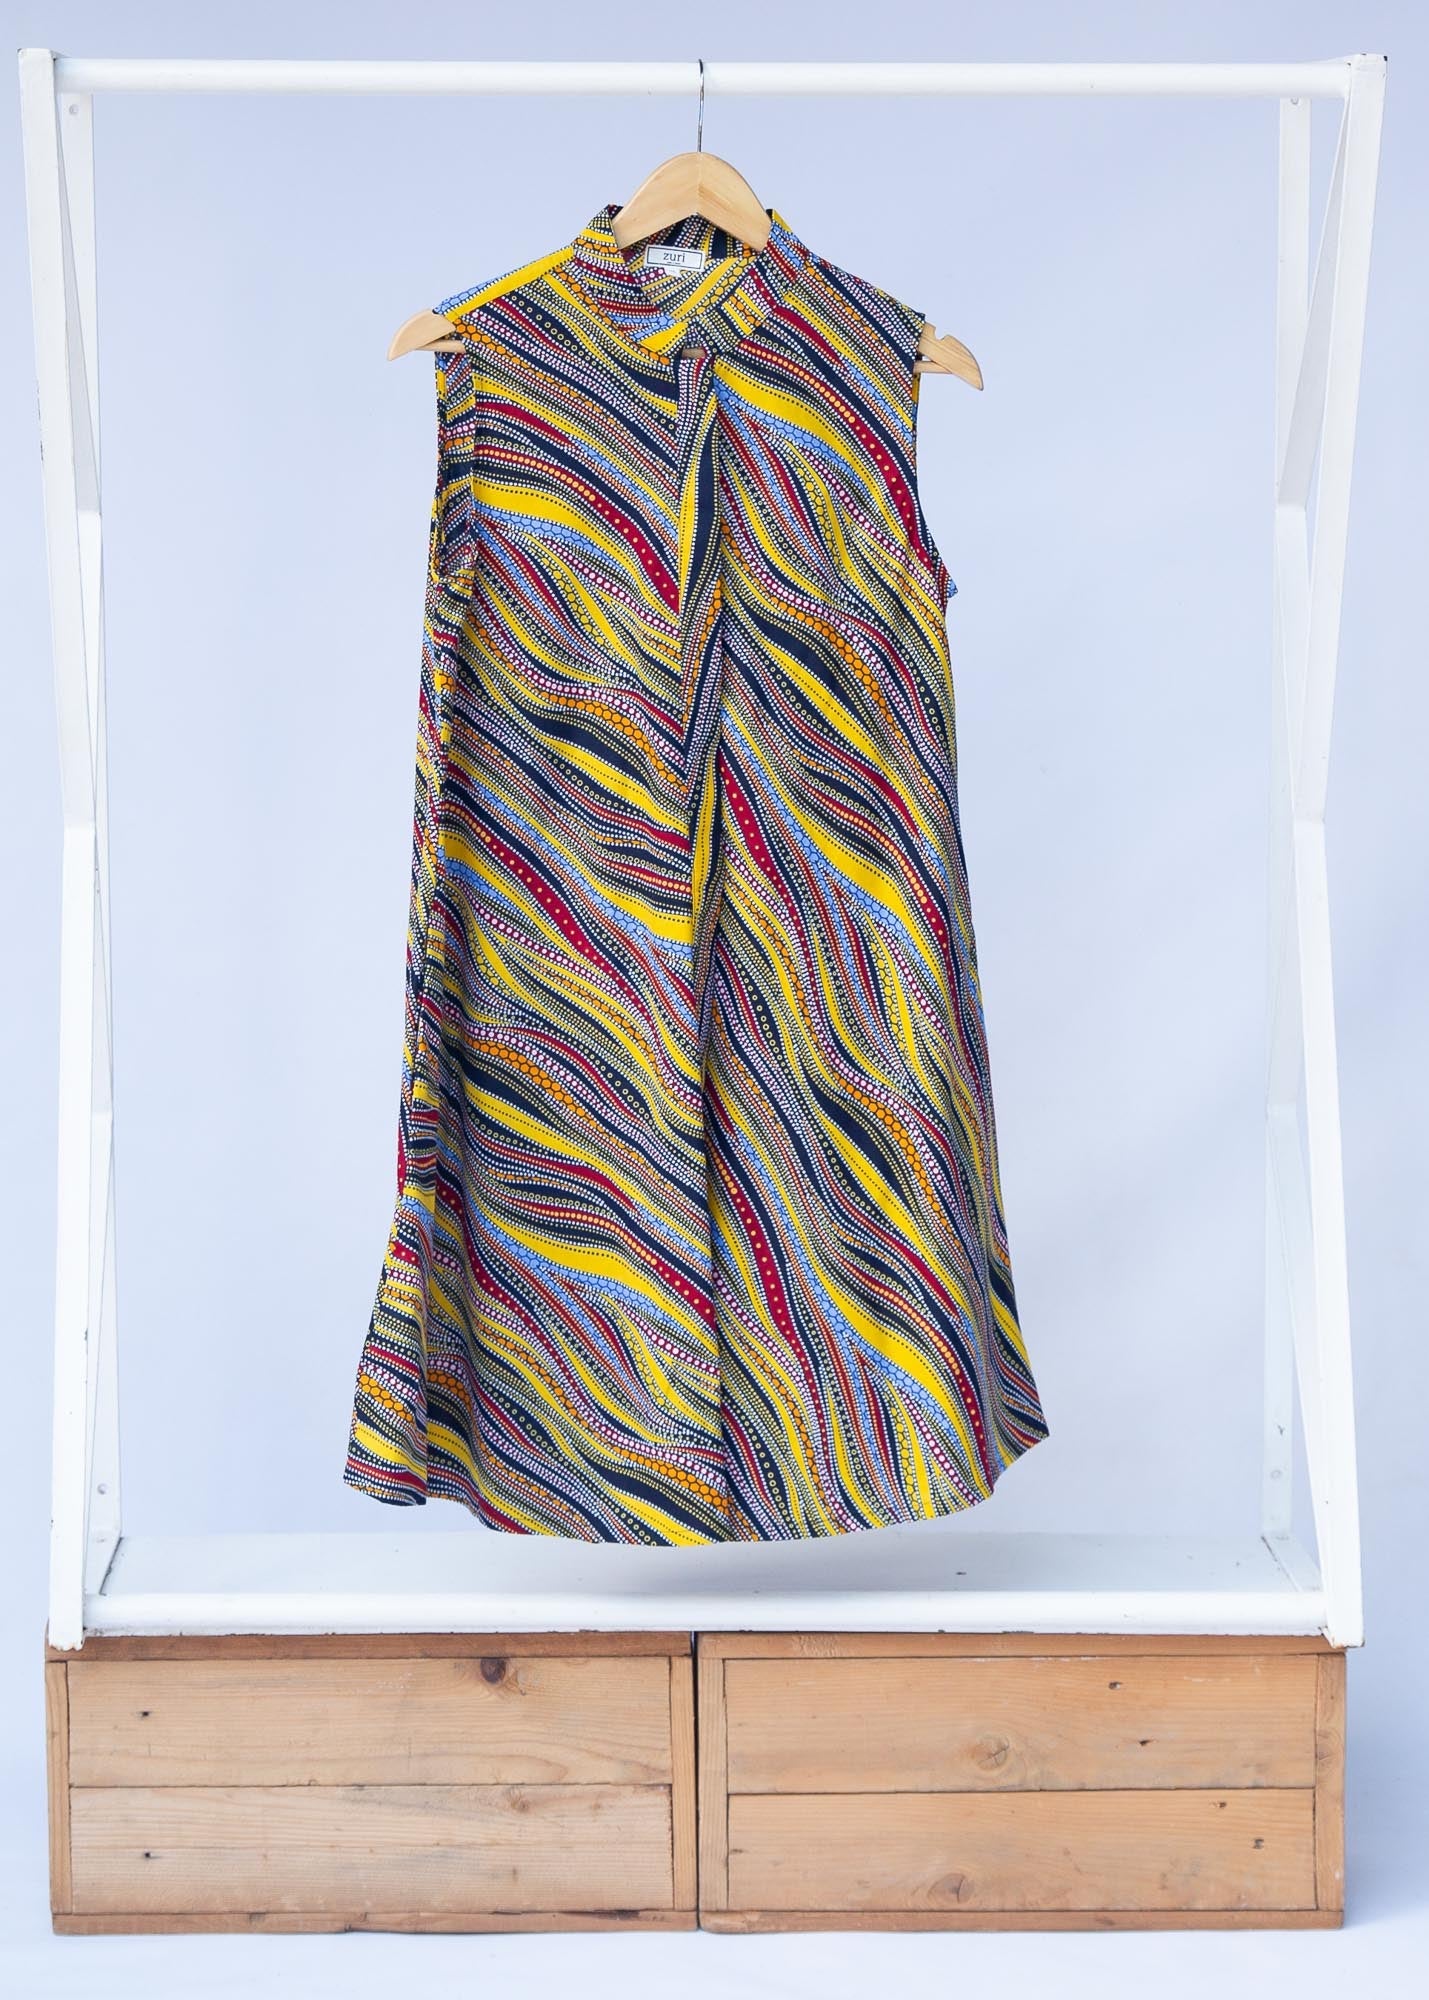 Display of  multi-colored abstract print dress